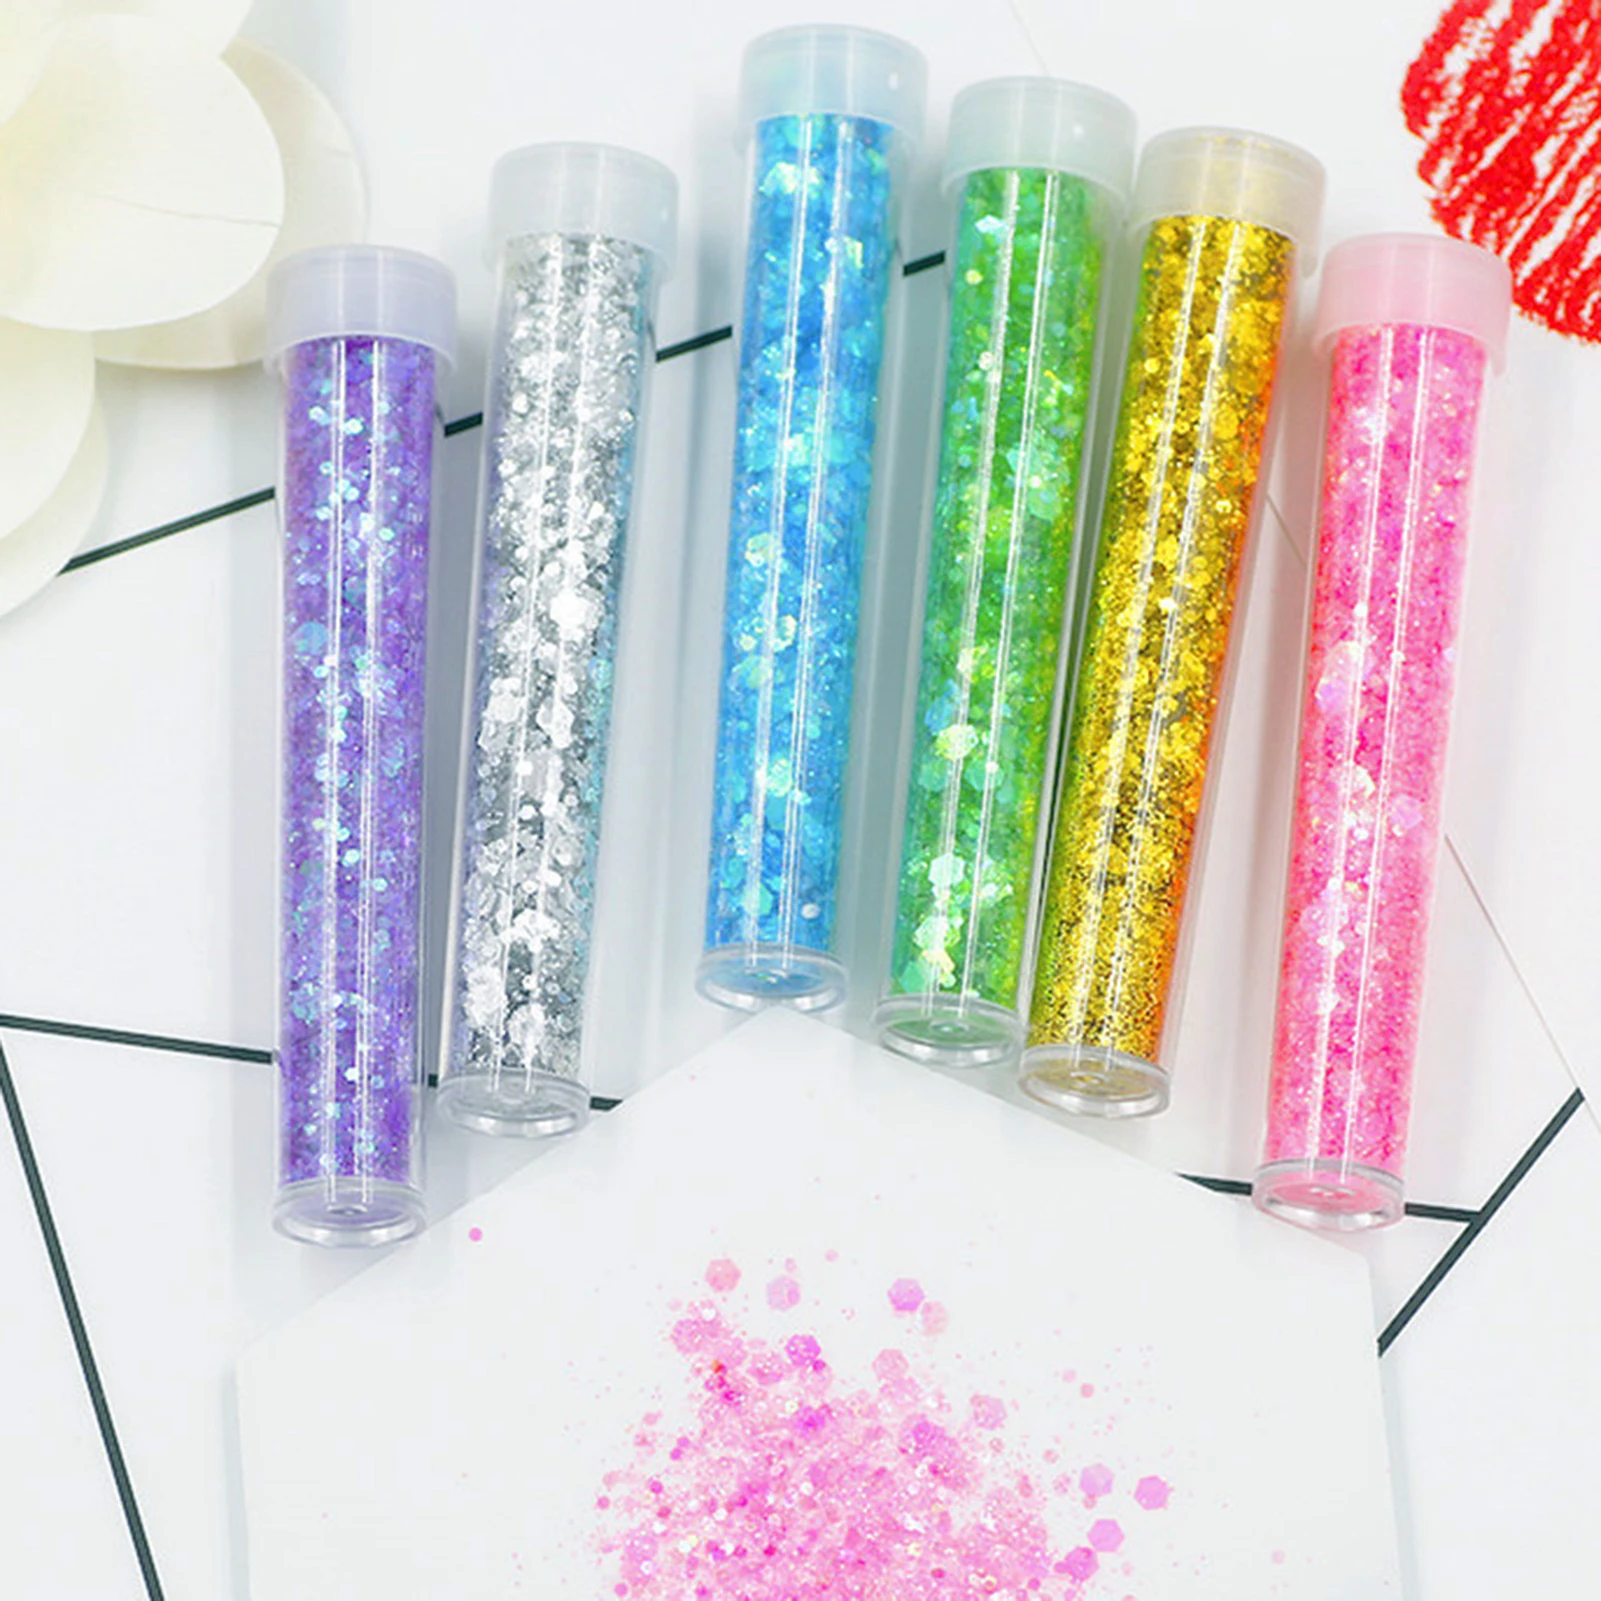 3Pcs/Set Women DIY Nail Art Polish Sequin Glitter Charms Kids Clay Modeling Tool Kids Educational Toys for Children Gifts